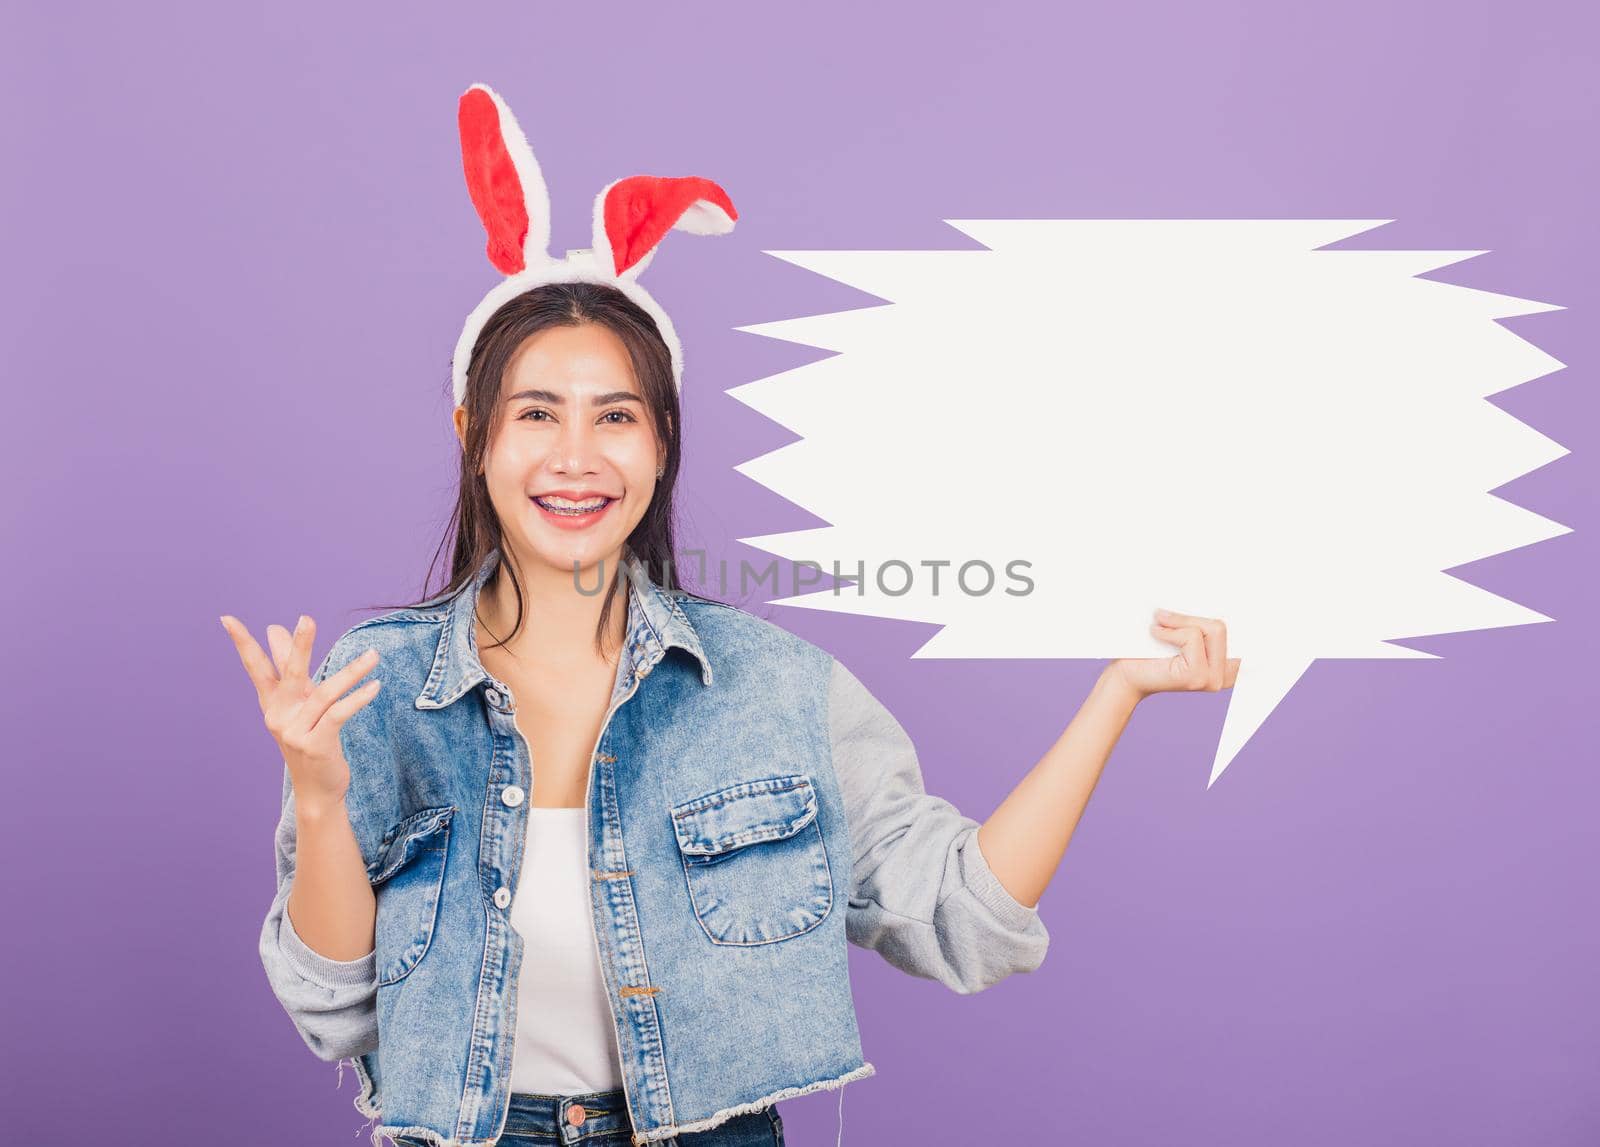 woman smiling excited wearing rabbit ears and denims holding empty speech bubble by Sorapop